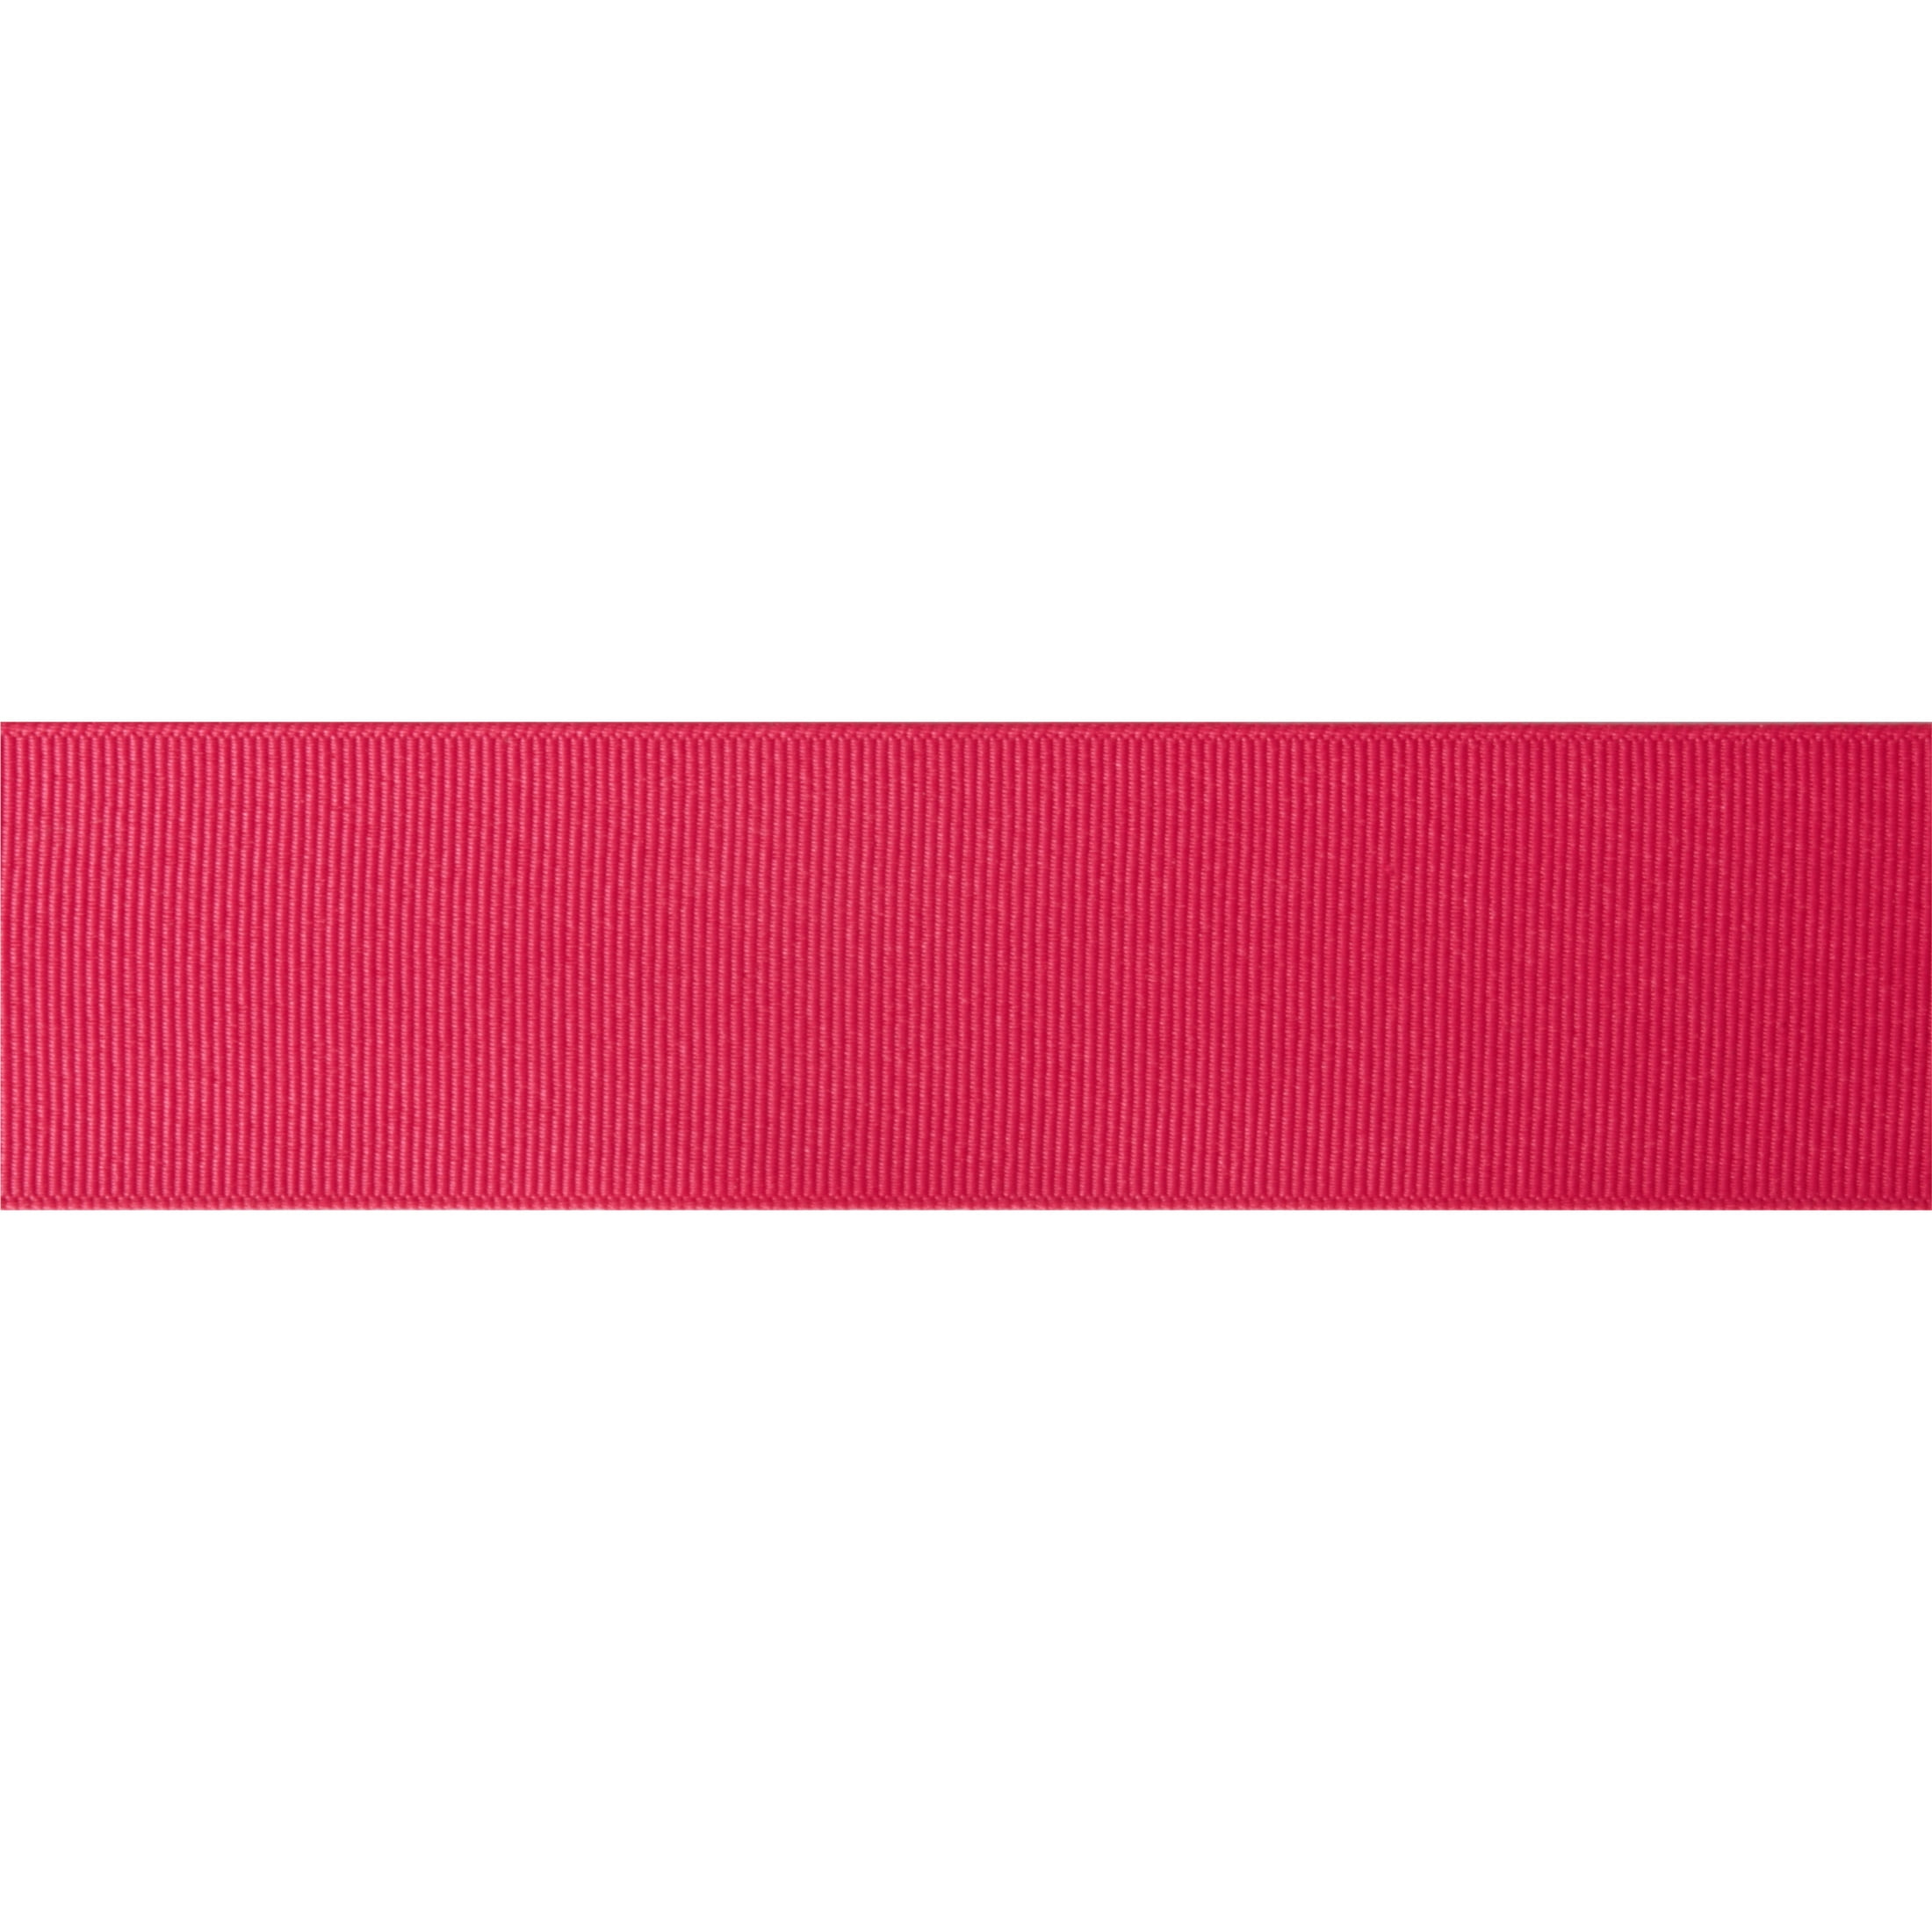 Hot Pink Grosgrain Ribbon 1 1/2 inches wide x 10 yards, Schiff Ribbon, 414